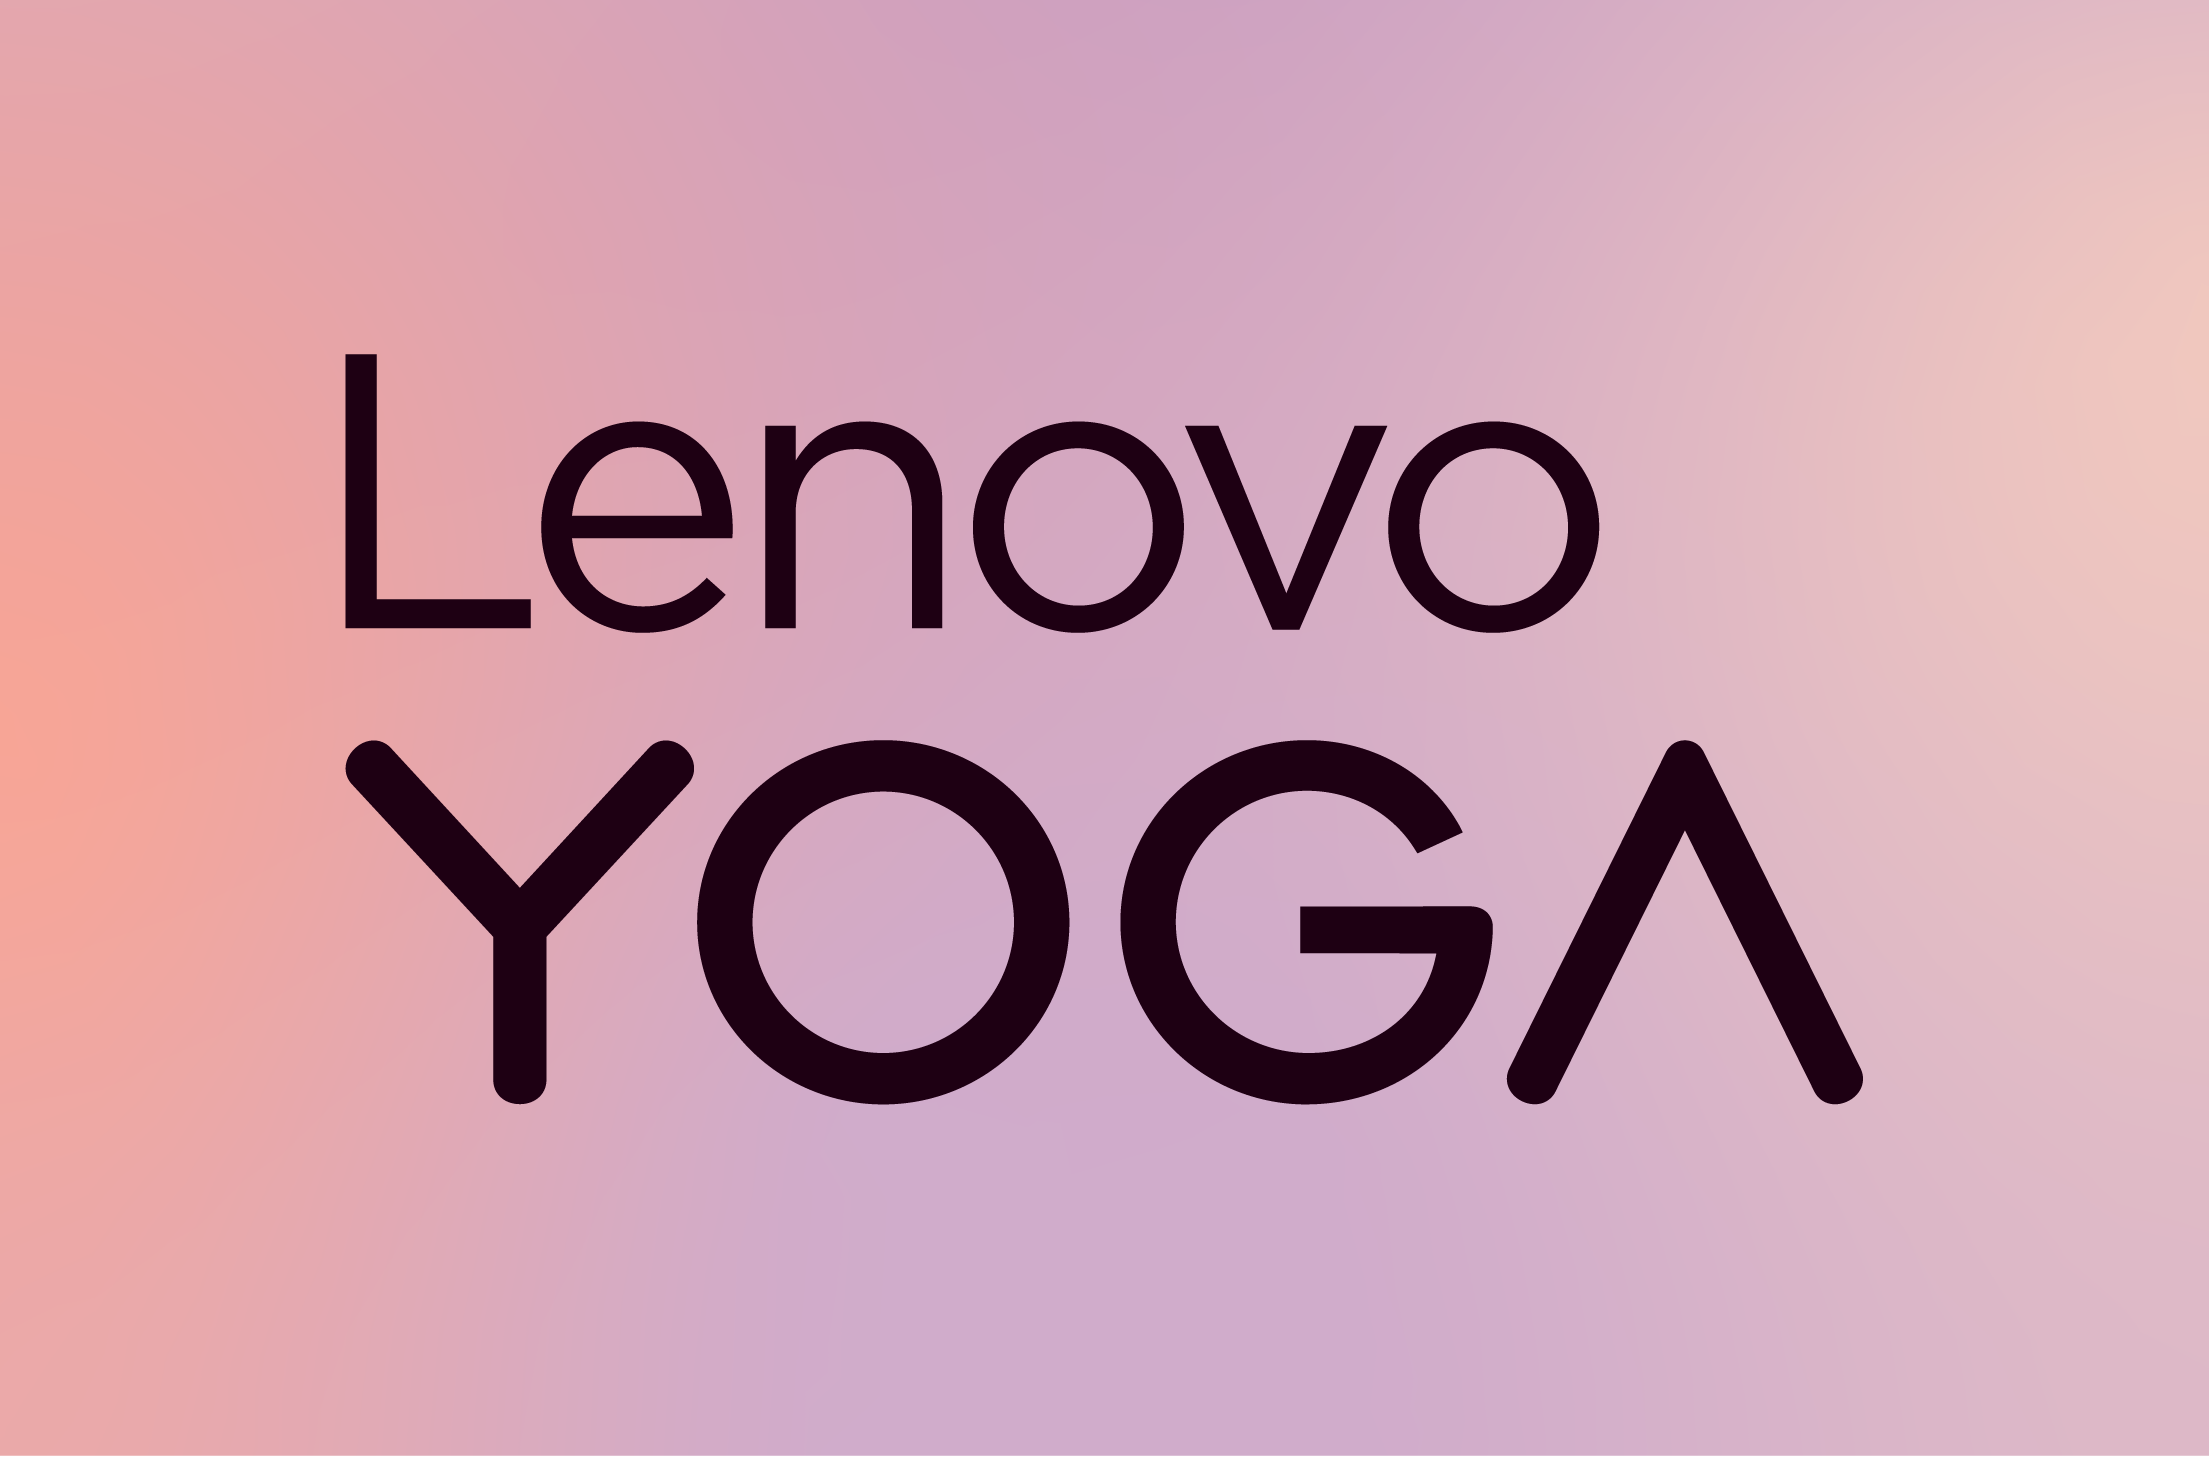 Lenovo Yoga wordmark in a deep color on a pale background.